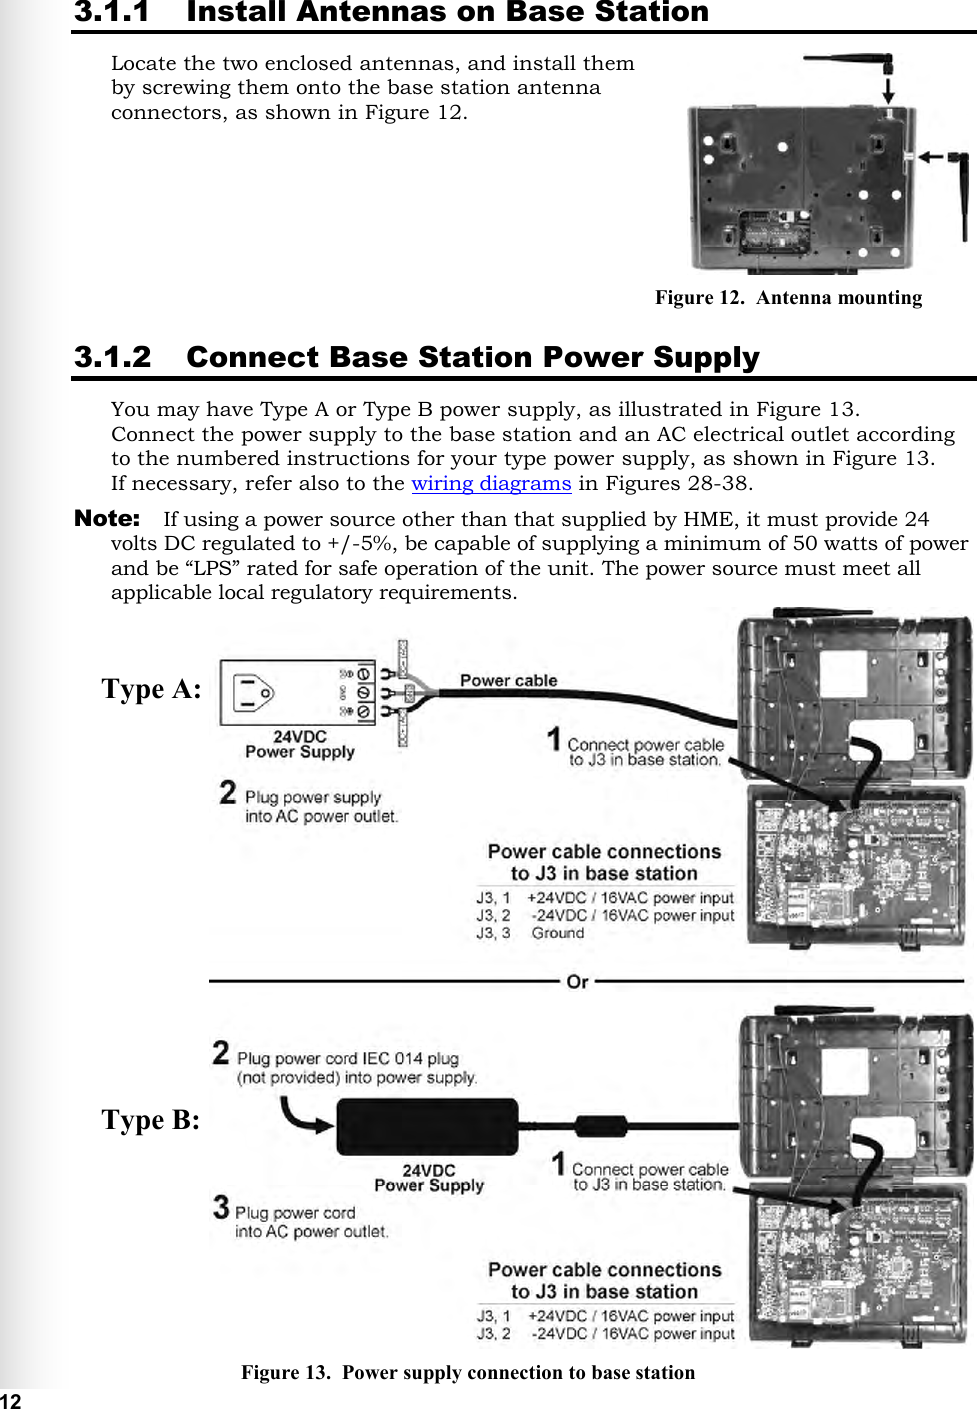   12 Type A: Type B:  3.1.1 Install Antennas on Base Station Locate the two enclosed antennas, and install them  by screwing them onto the base station antenna connectors, as shown in Figure 12.     3.1.2 Connect Base Station Power Supply You may have Type A or Type B power supply, as illustrated in Figure 13. Connect the power supply to the base station and an AC electrical outlet according to the numbered instructions for your type power supply, as shown in Figure 13.  If necessary, refer also to the wiring diagrams in Figures 28-38. Note:  If using a power source other than that supplied by HME, it must provide 24 volts DC regulated to +/-5%, be capable of supplying a minimum of 50 watts of power and be “LPS” rated for safe operation of the unit. The power source must meet all applicable local regulatory requirements.        Figure 12.  Antenna mounting Figure 13.  Power supply connection to base station 